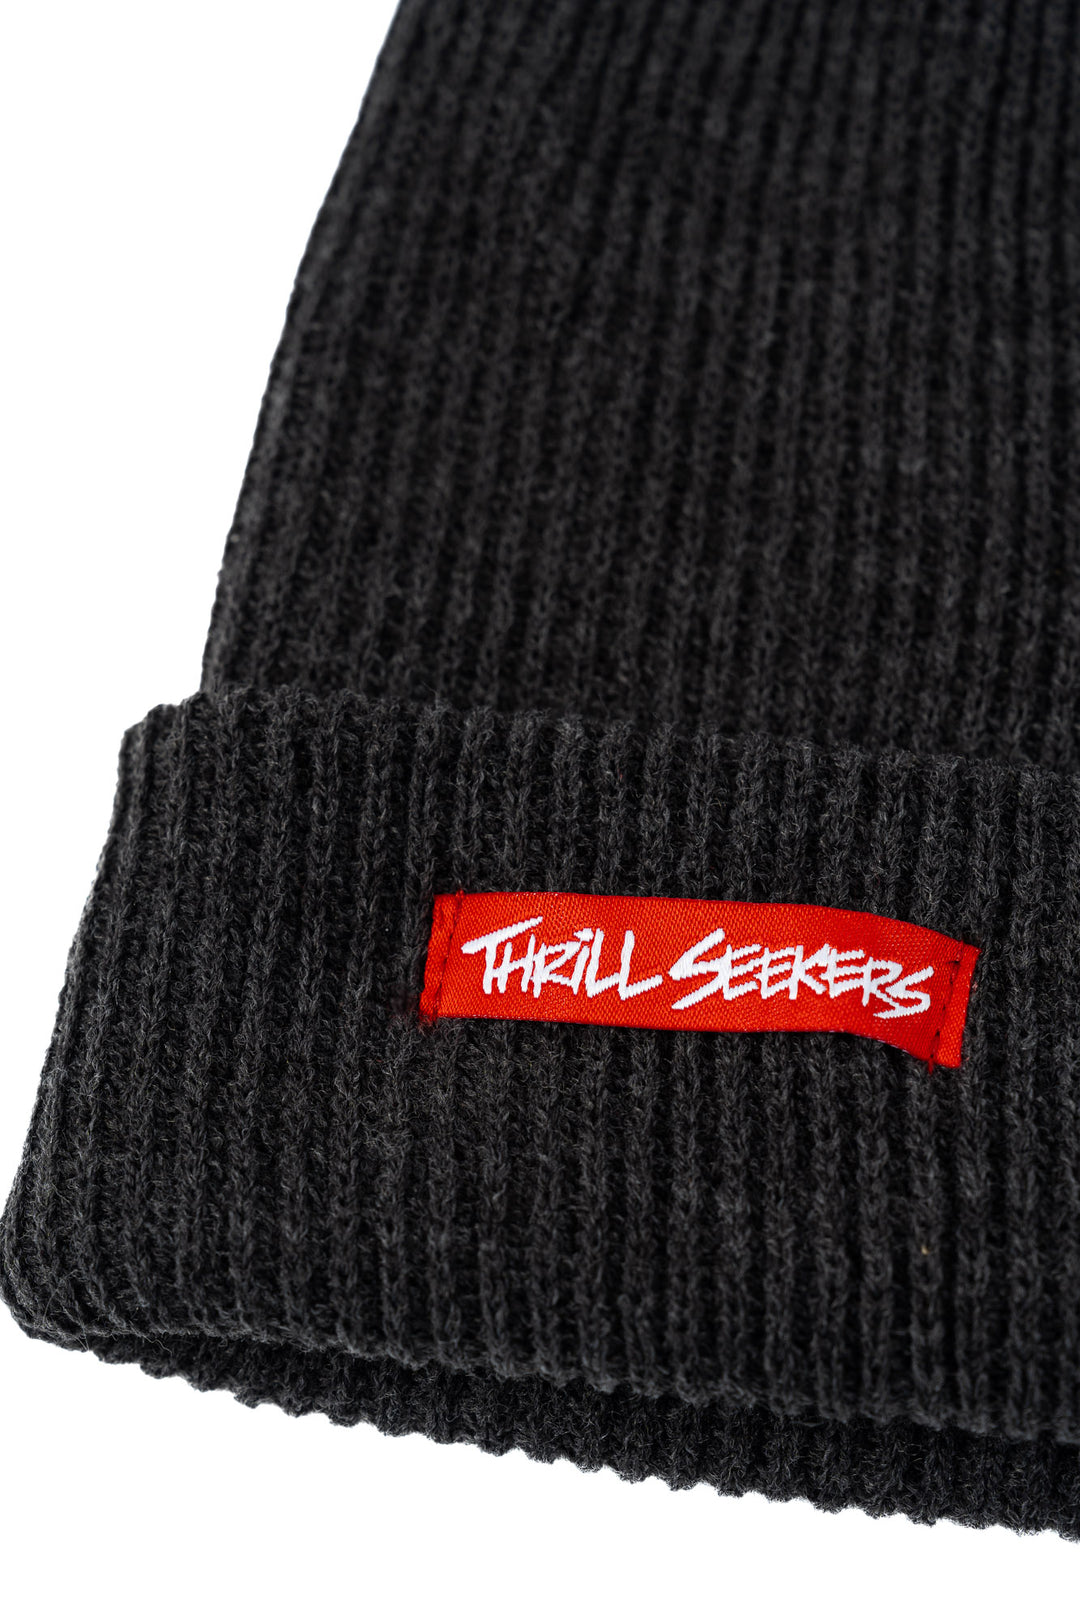 Thrill Seekers Loose Knit Beanie Charcoal